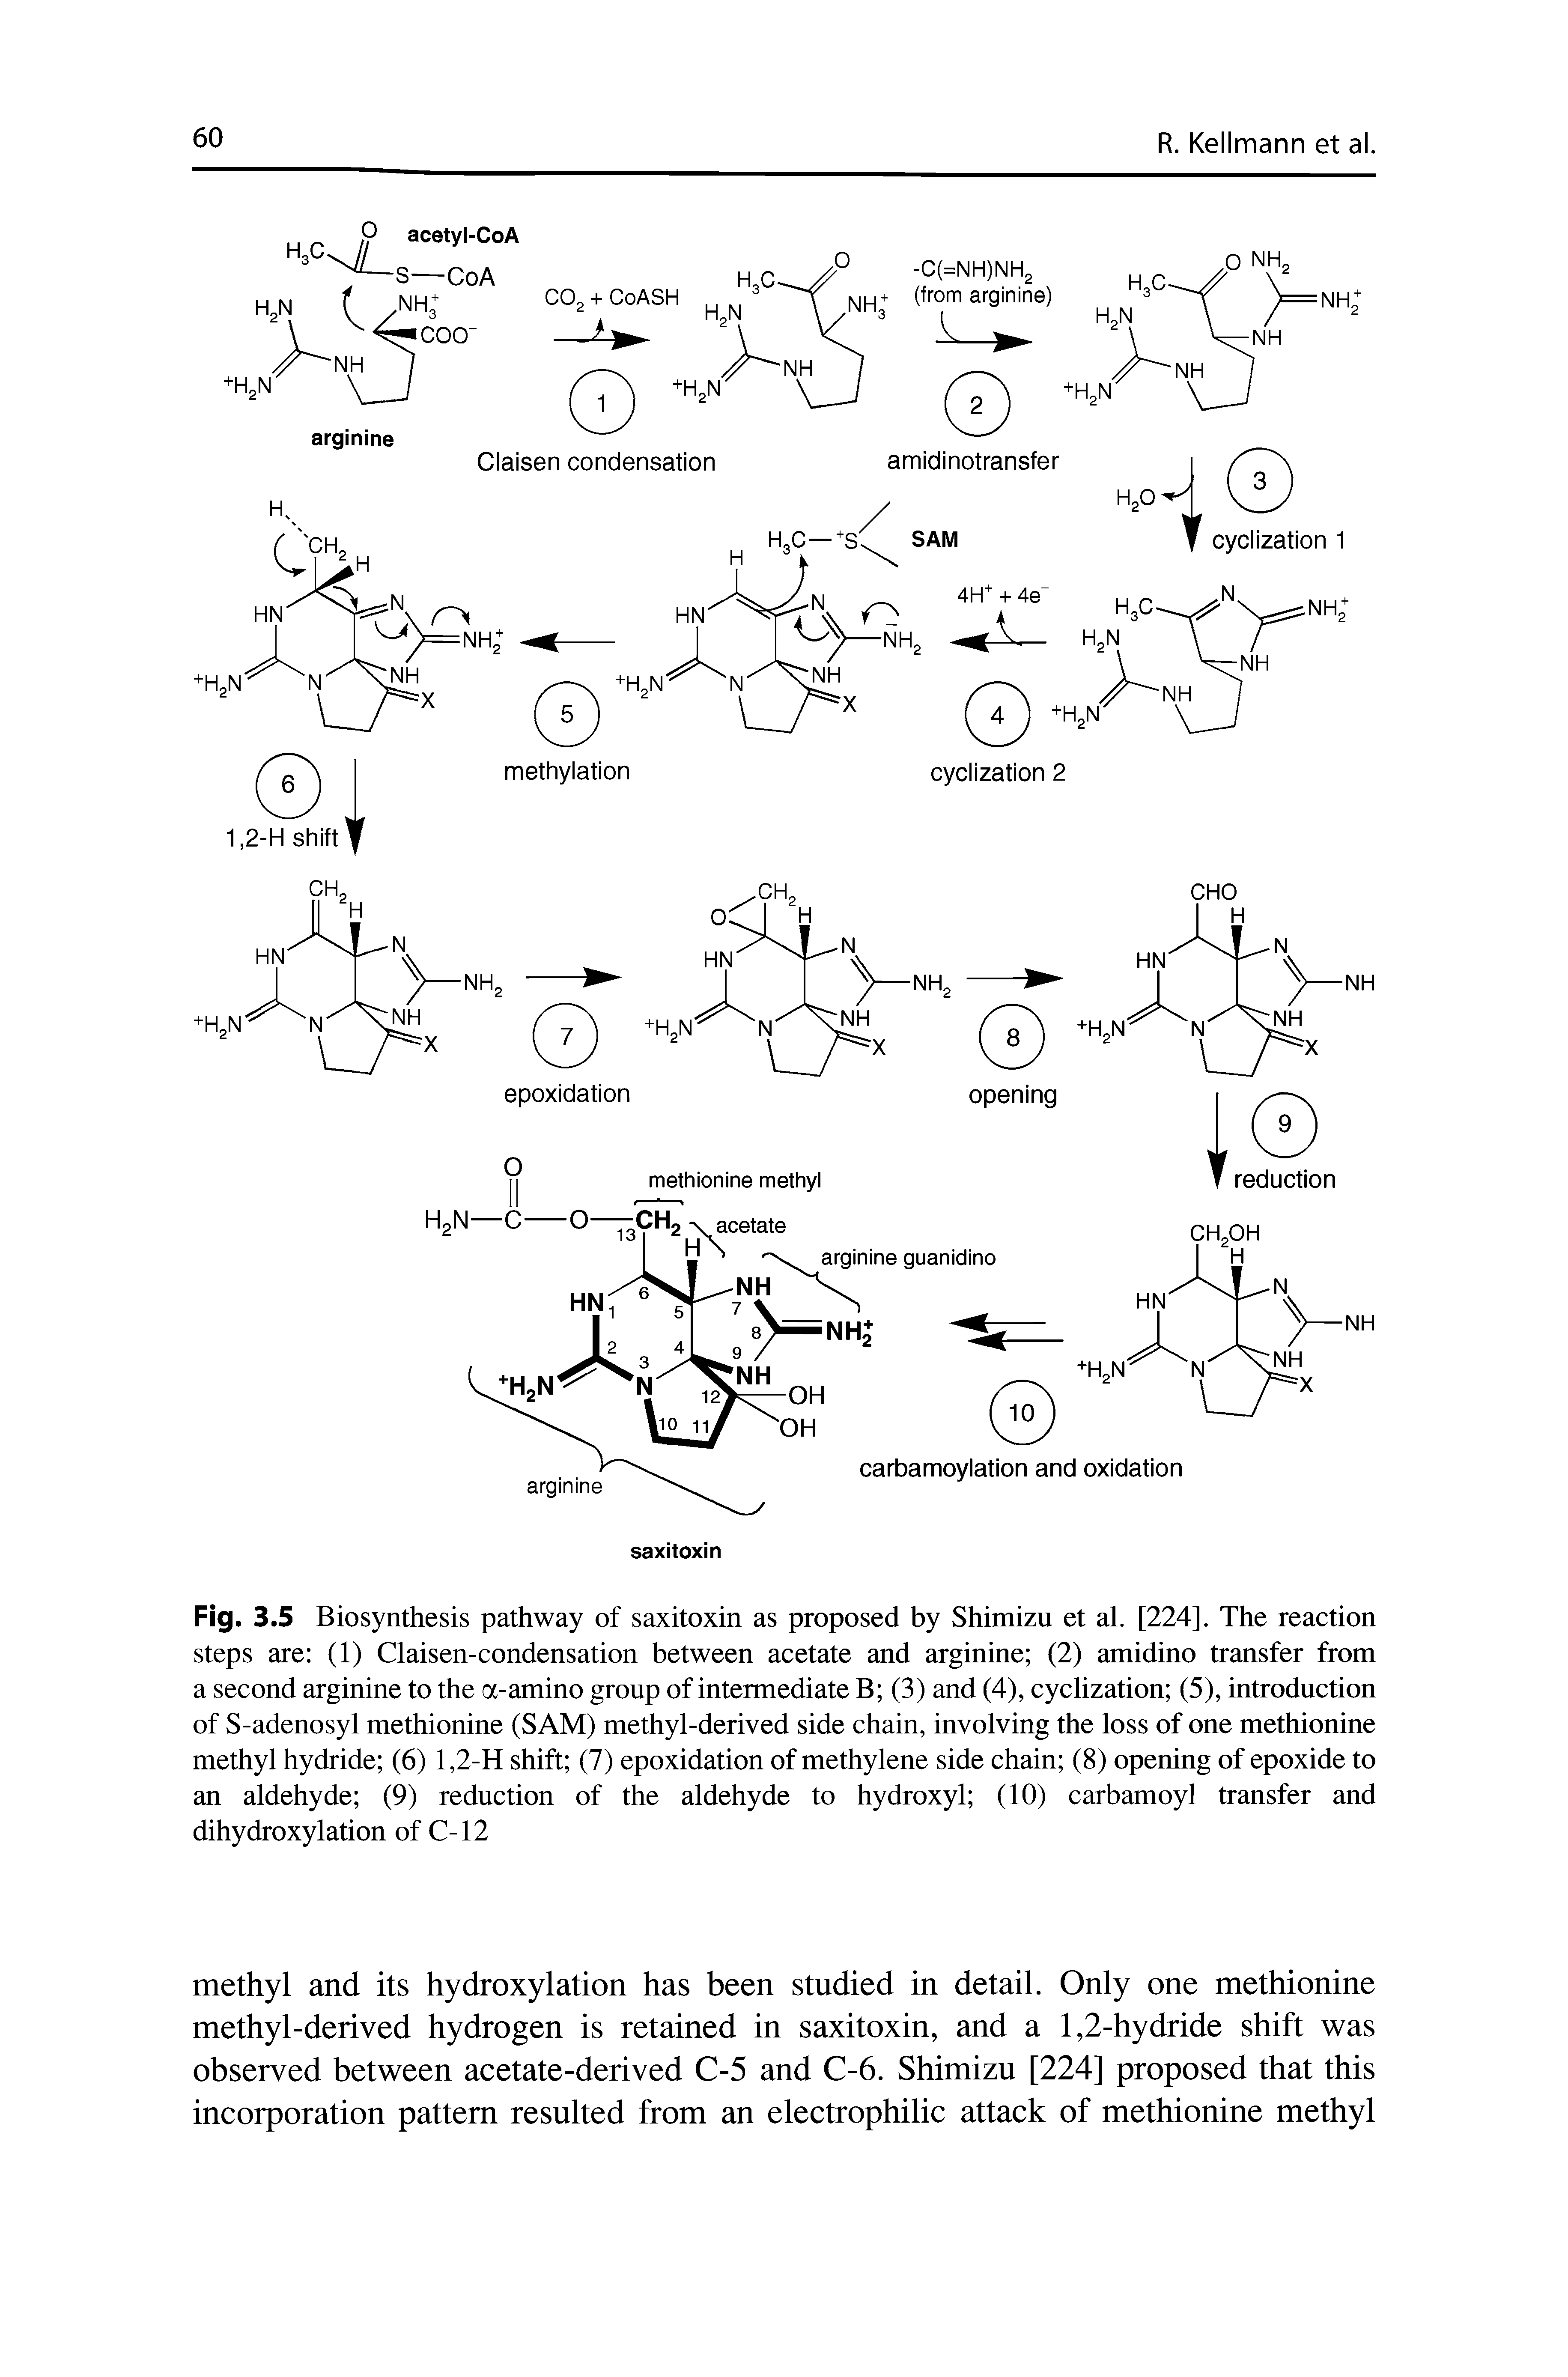 Fig. 3.5 Biosynthesis pathway of saxitoxin as proposed by Shimizu et al. [224]. The reaction steps are (1) Claisen-condensation between acetate and arginine (2) amidino transfer from a second arginine to the a-amino group of intermediate B (3) and (4), cyclization (5), introduction of S-adenosyl methionine (SAM) methyl-derived side chain, involving the loss of one methionine methyl hydride (6) 1,2-H shift (7) epoxidation of methylene side chain (8) opening of epoxide to an aldehyde (9) reduction of the aldehyde to hydroxyl (10) carbamoyl transfer and dihydroxylation of C-12...